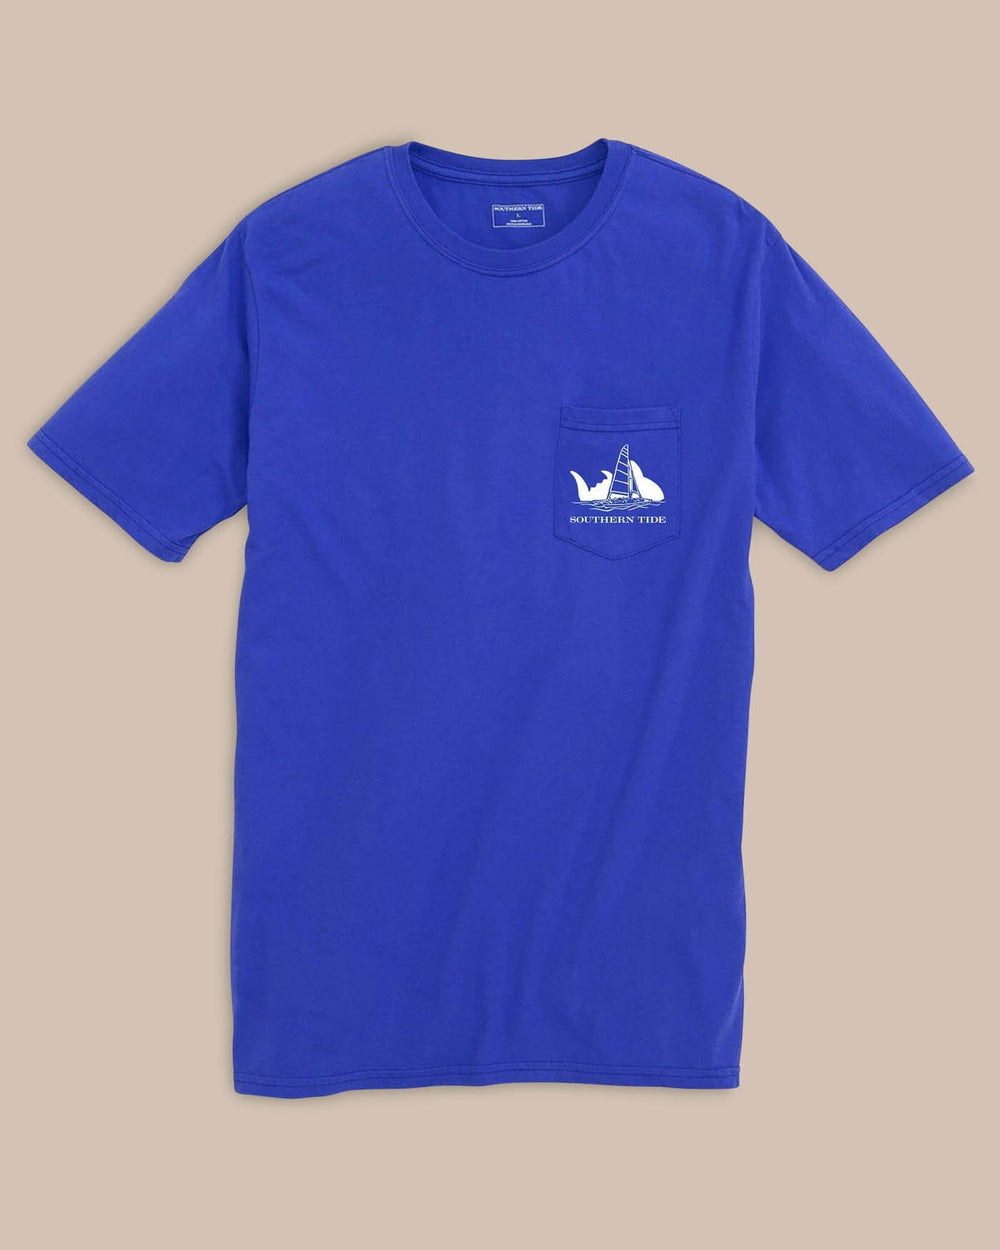 The front view of the Sunset Silhouette T-Shirt by Southern Tide - University Blue